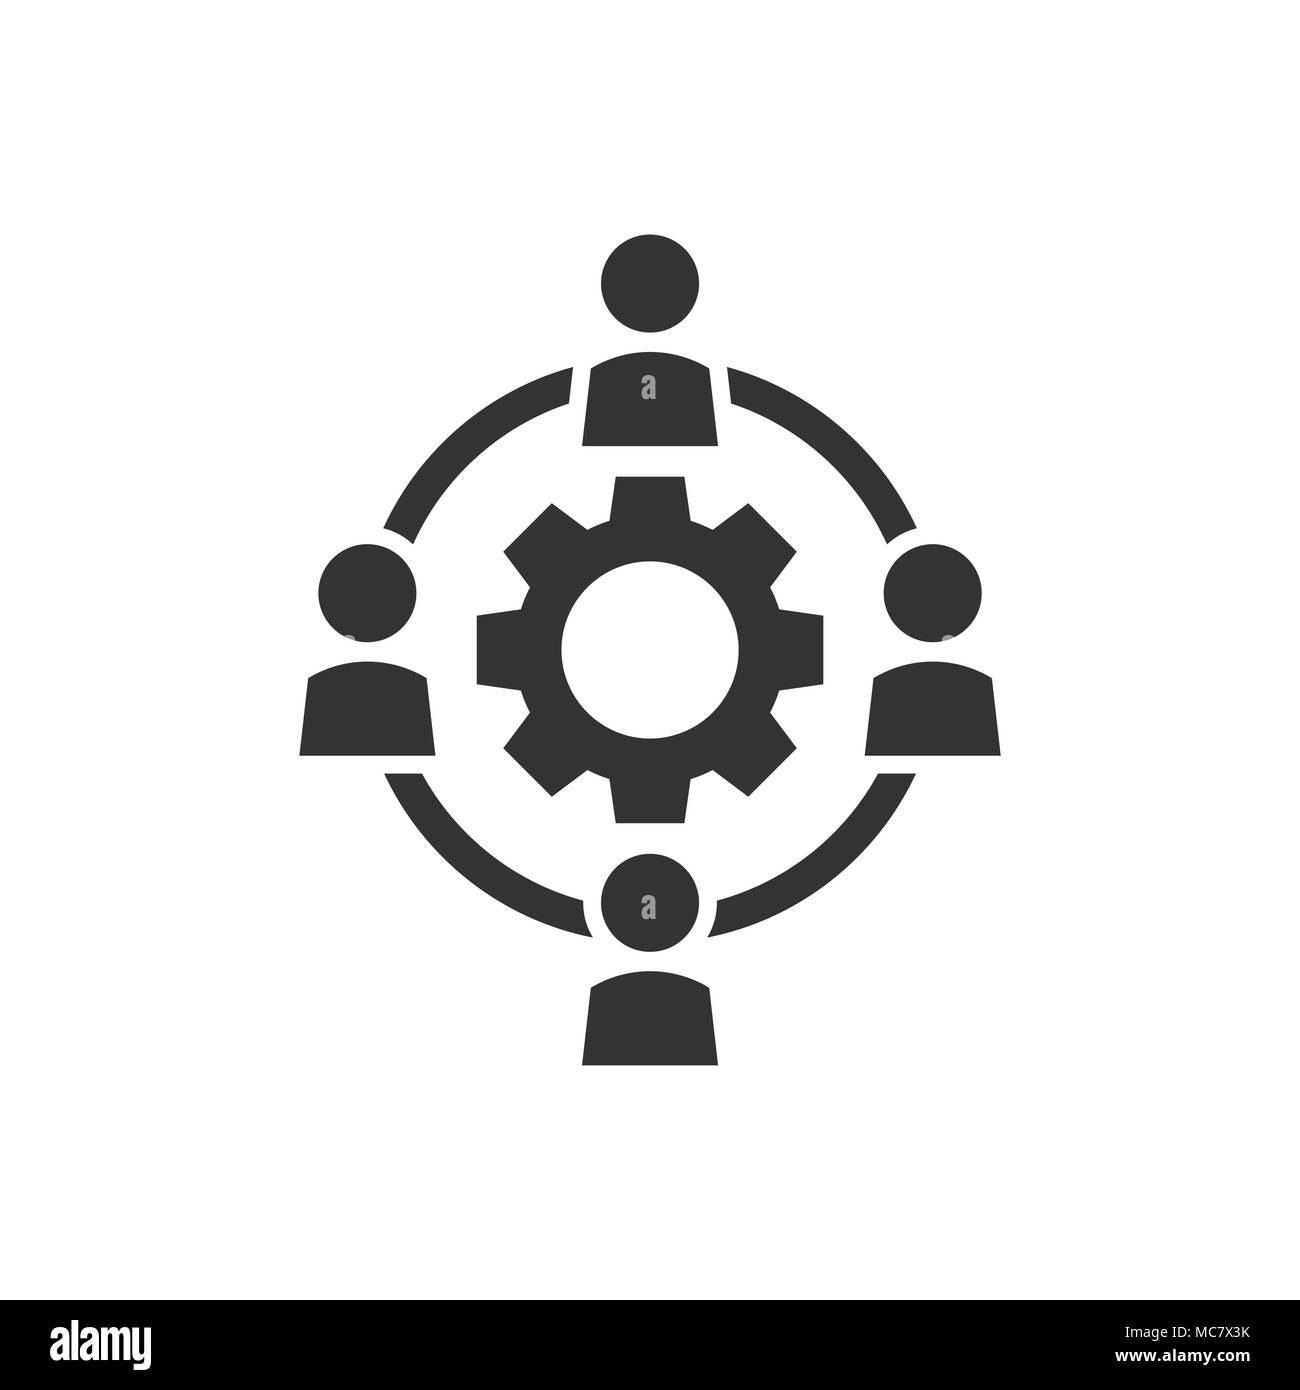 Outsourcing business collaboration vector icon in flat style. People cooperation illustration on white isolated background. Teamwork business concept. Stock Vector